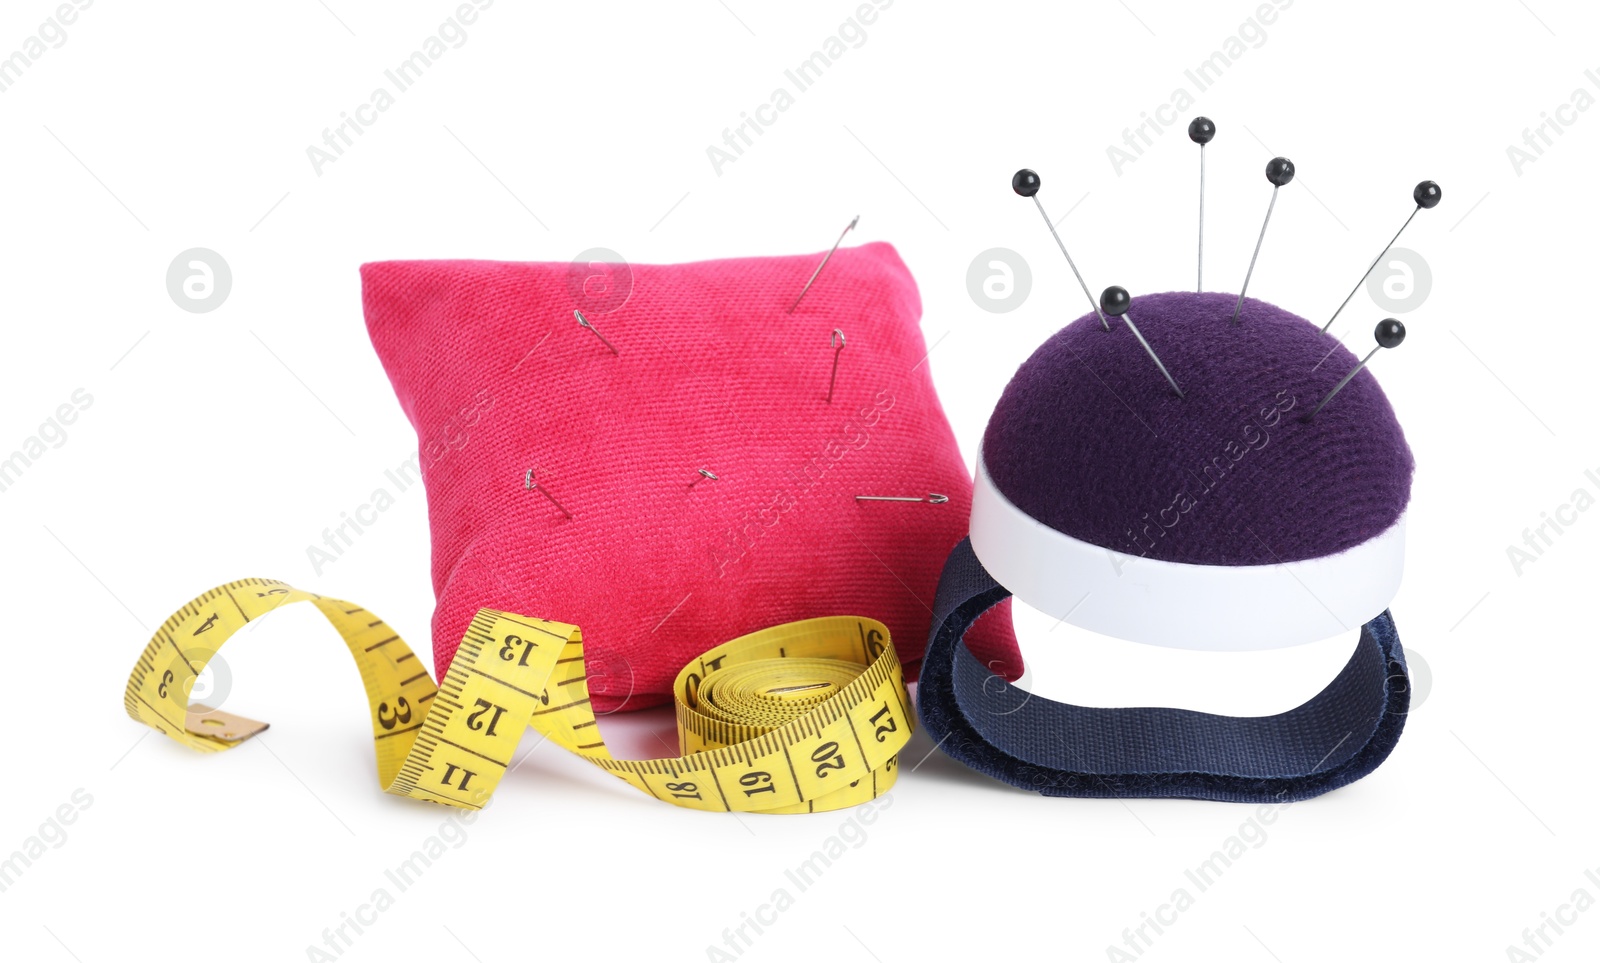 Photo of Pincushions with sewing needles, pins and measuring tape isolated on white